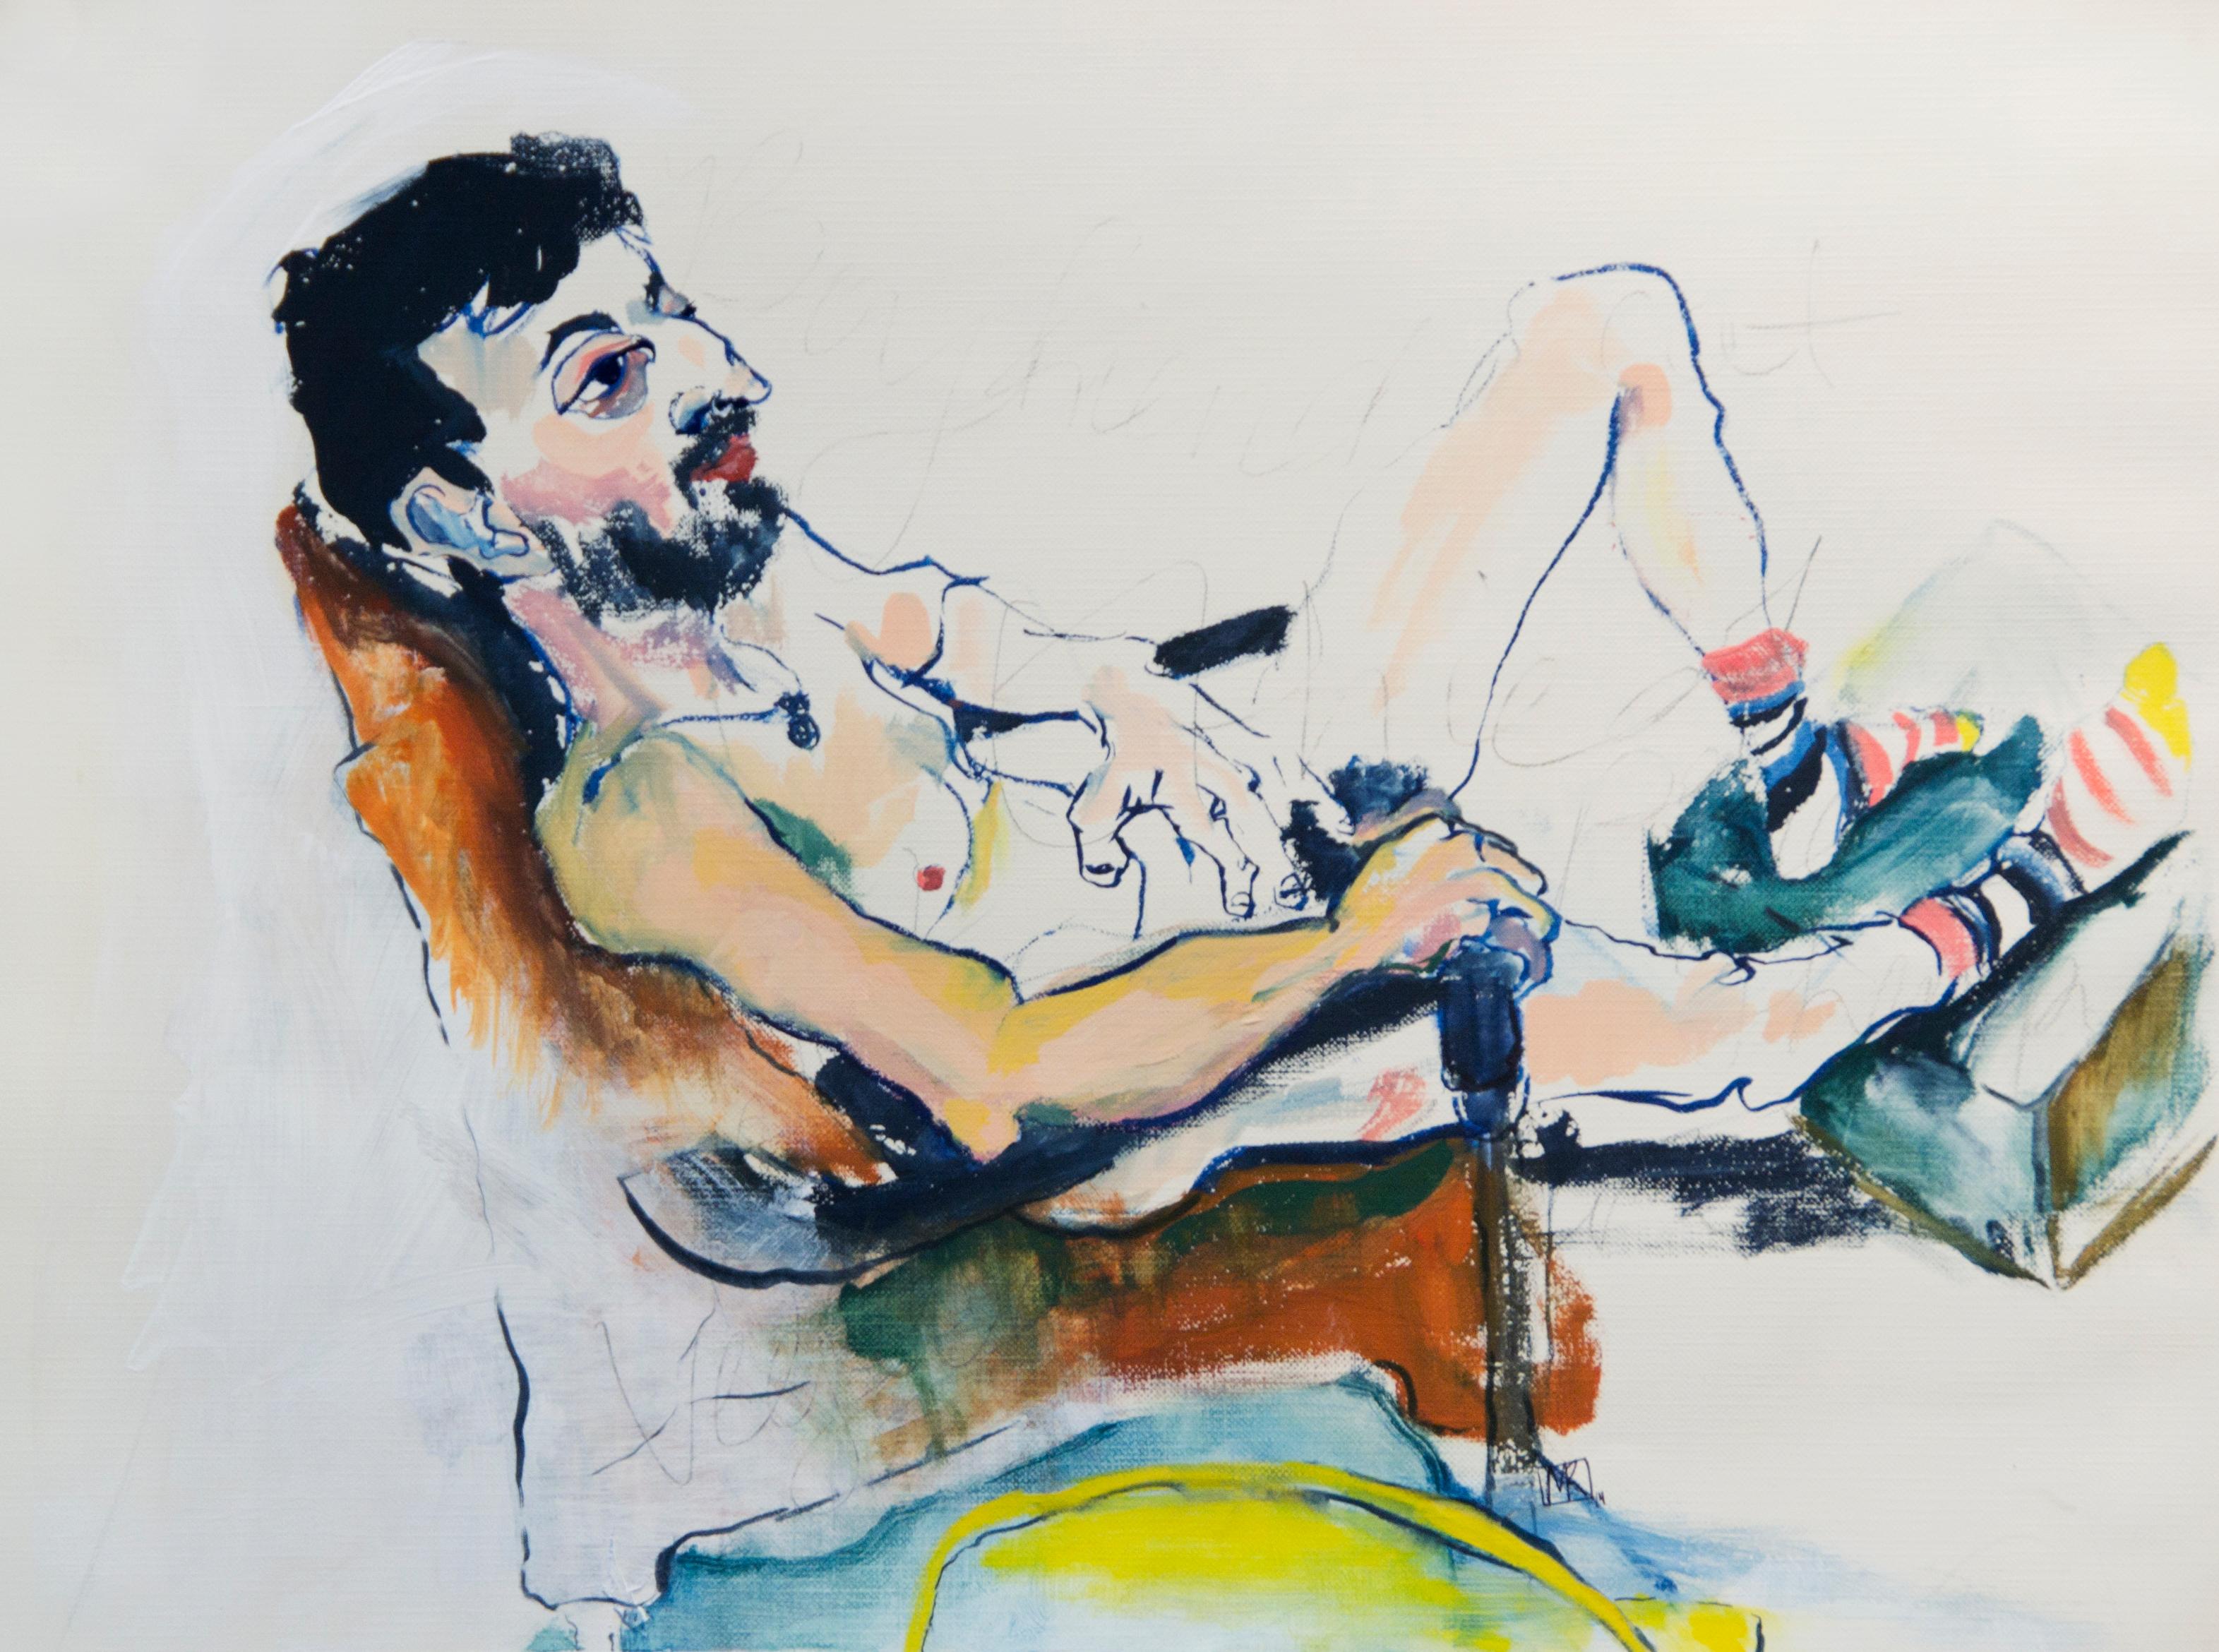 "Danny", lounging nude figure painting w/ pencil, gouache, and acrylic on paper